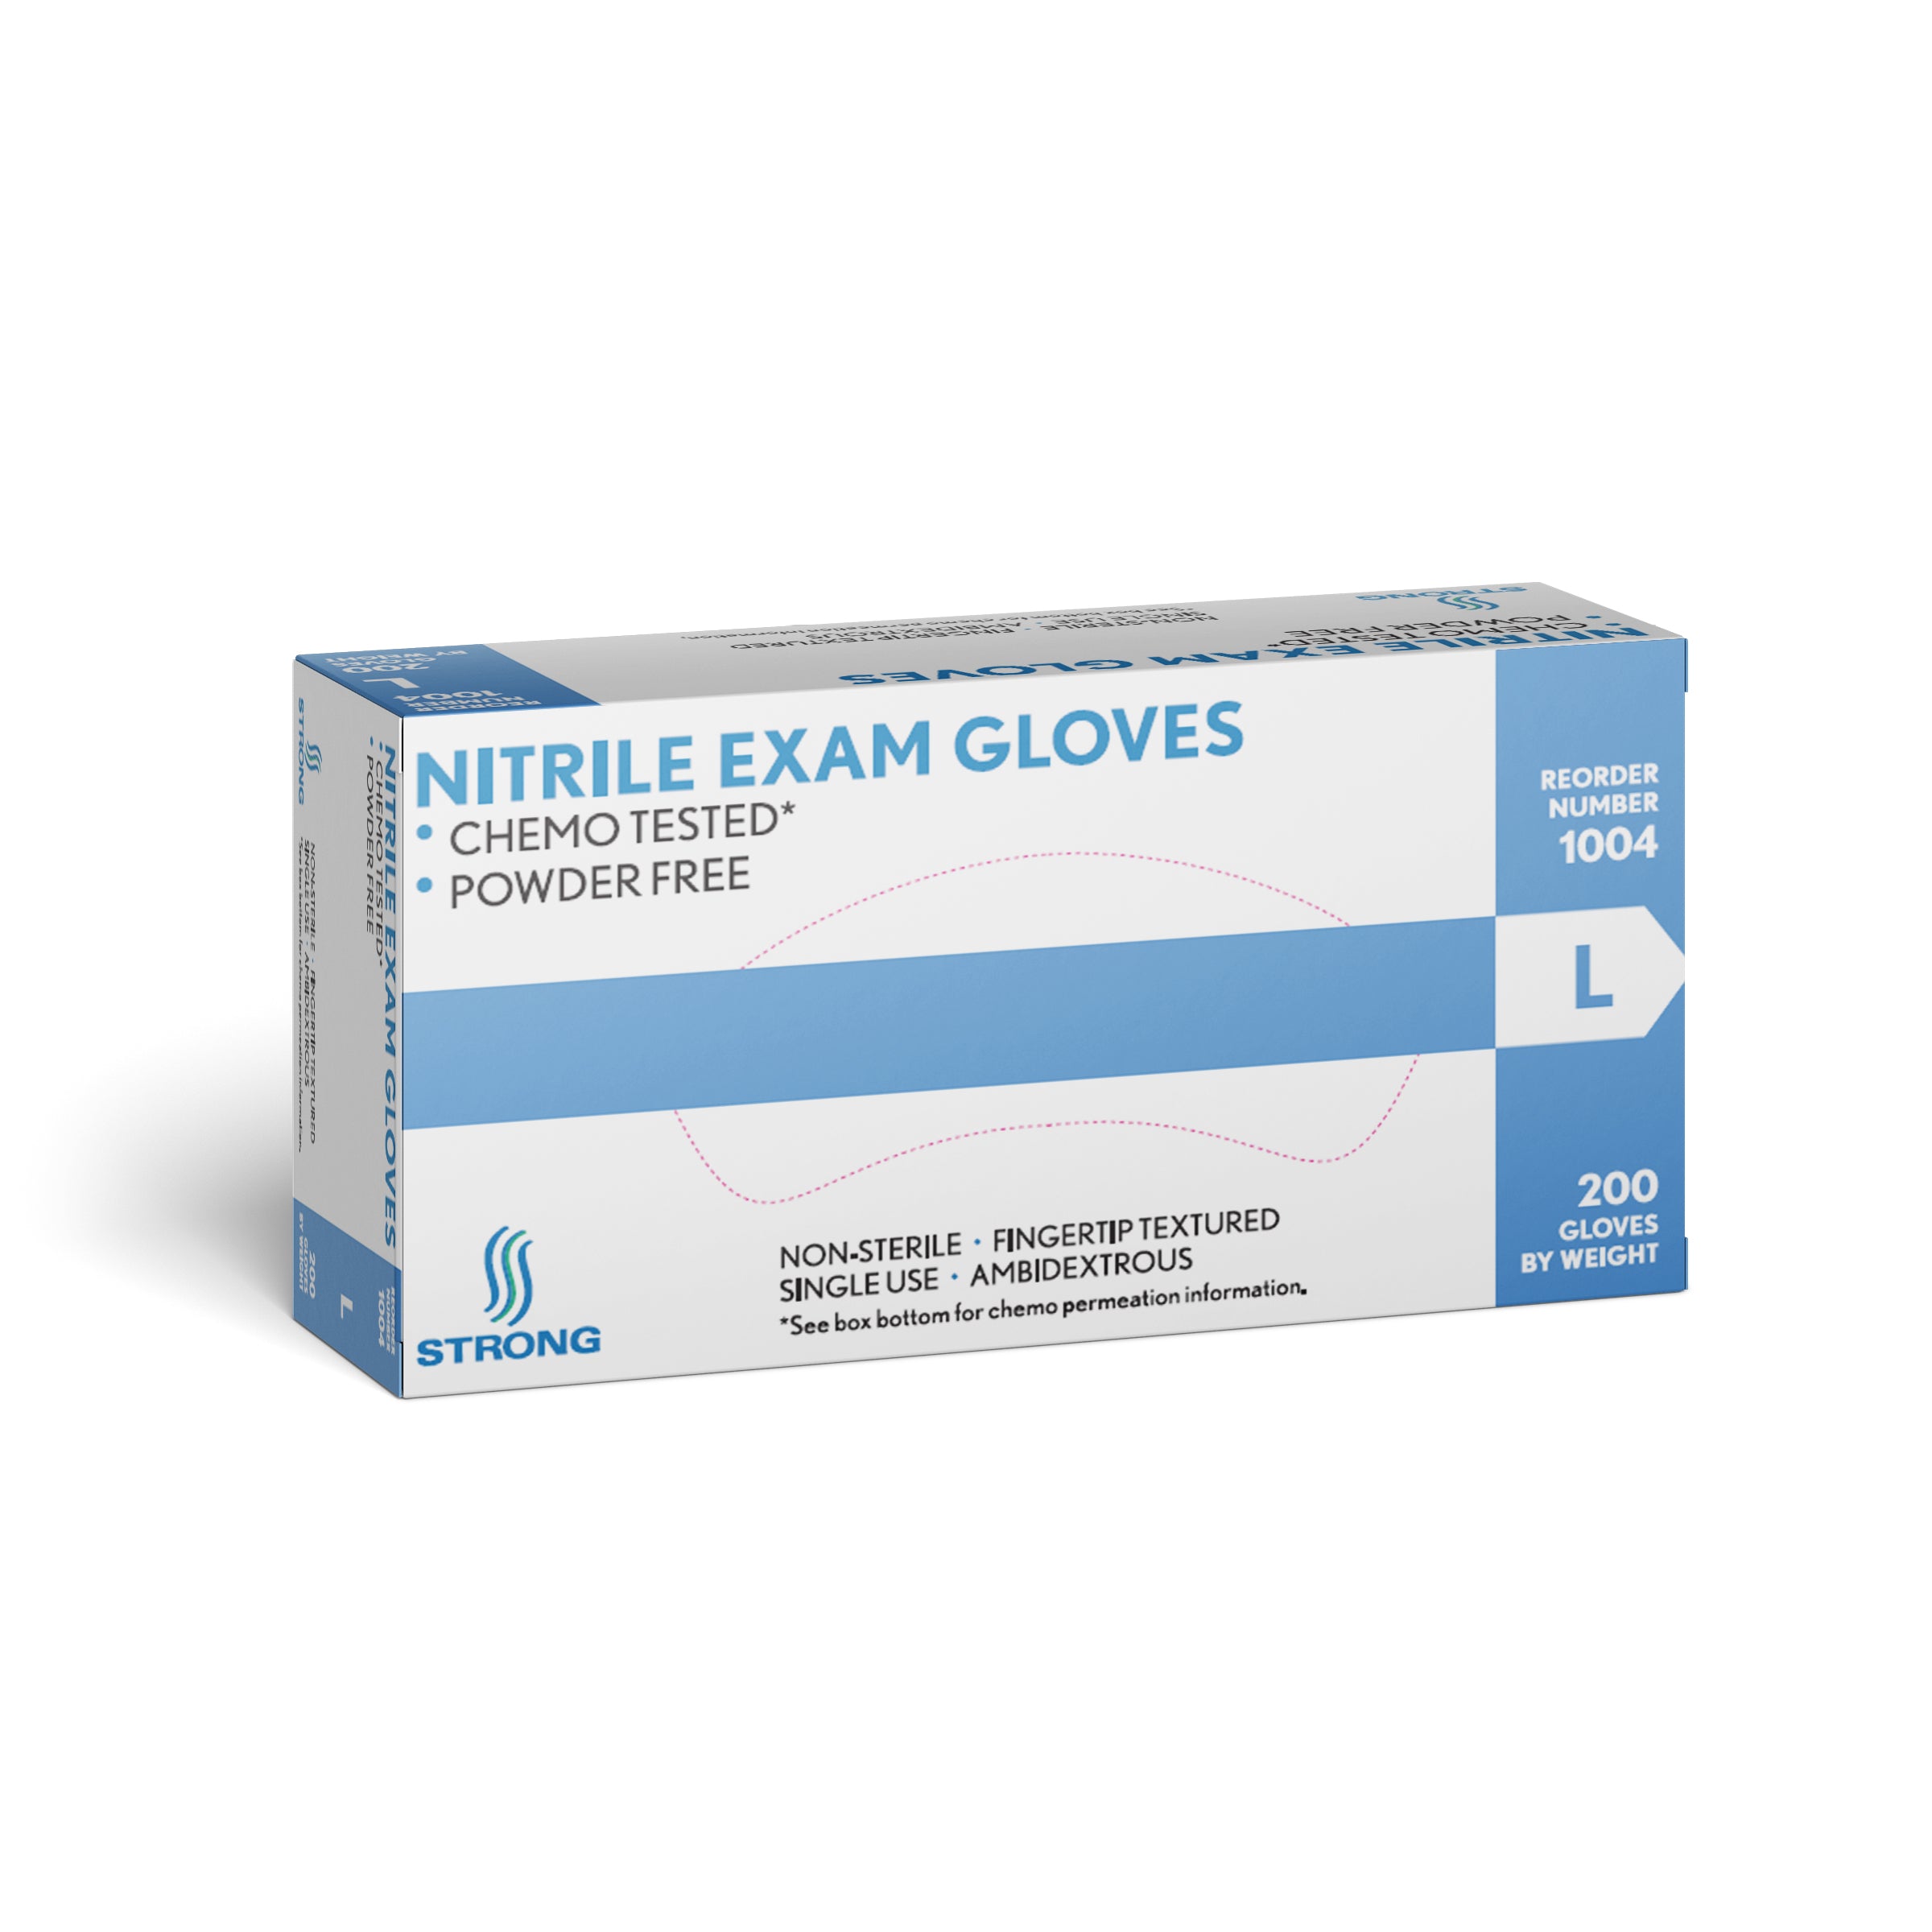 STRONG Nitrile Exam Gloves - 200 Per Box - Powder Free – STRONG ...